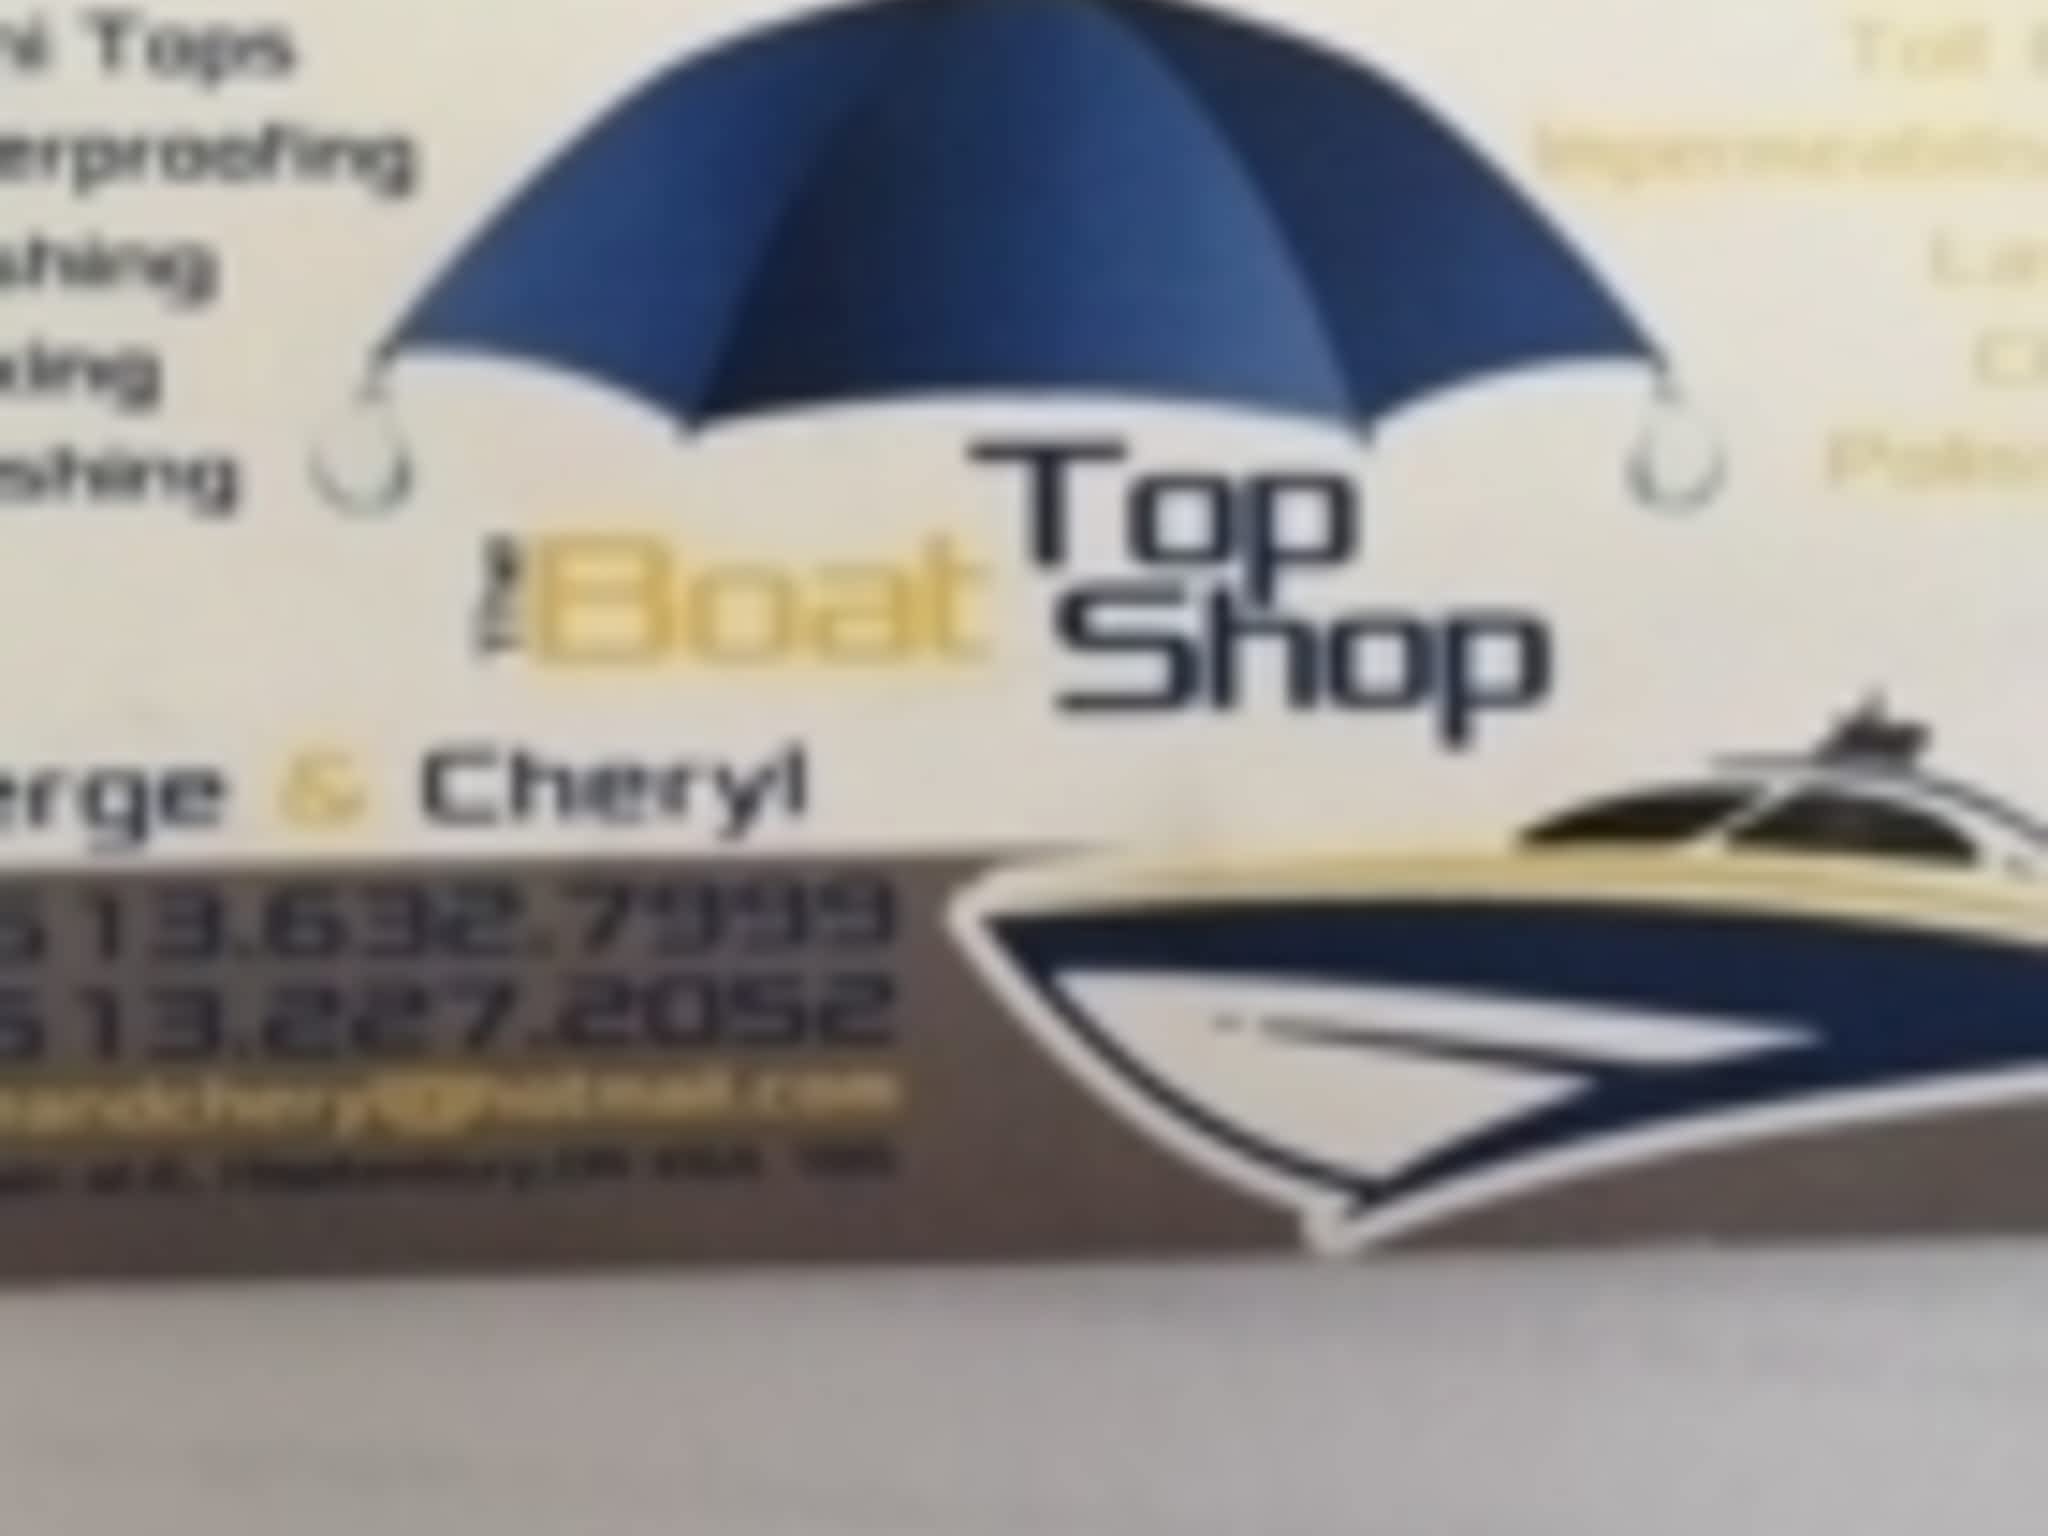 photo The Boat Top Shop